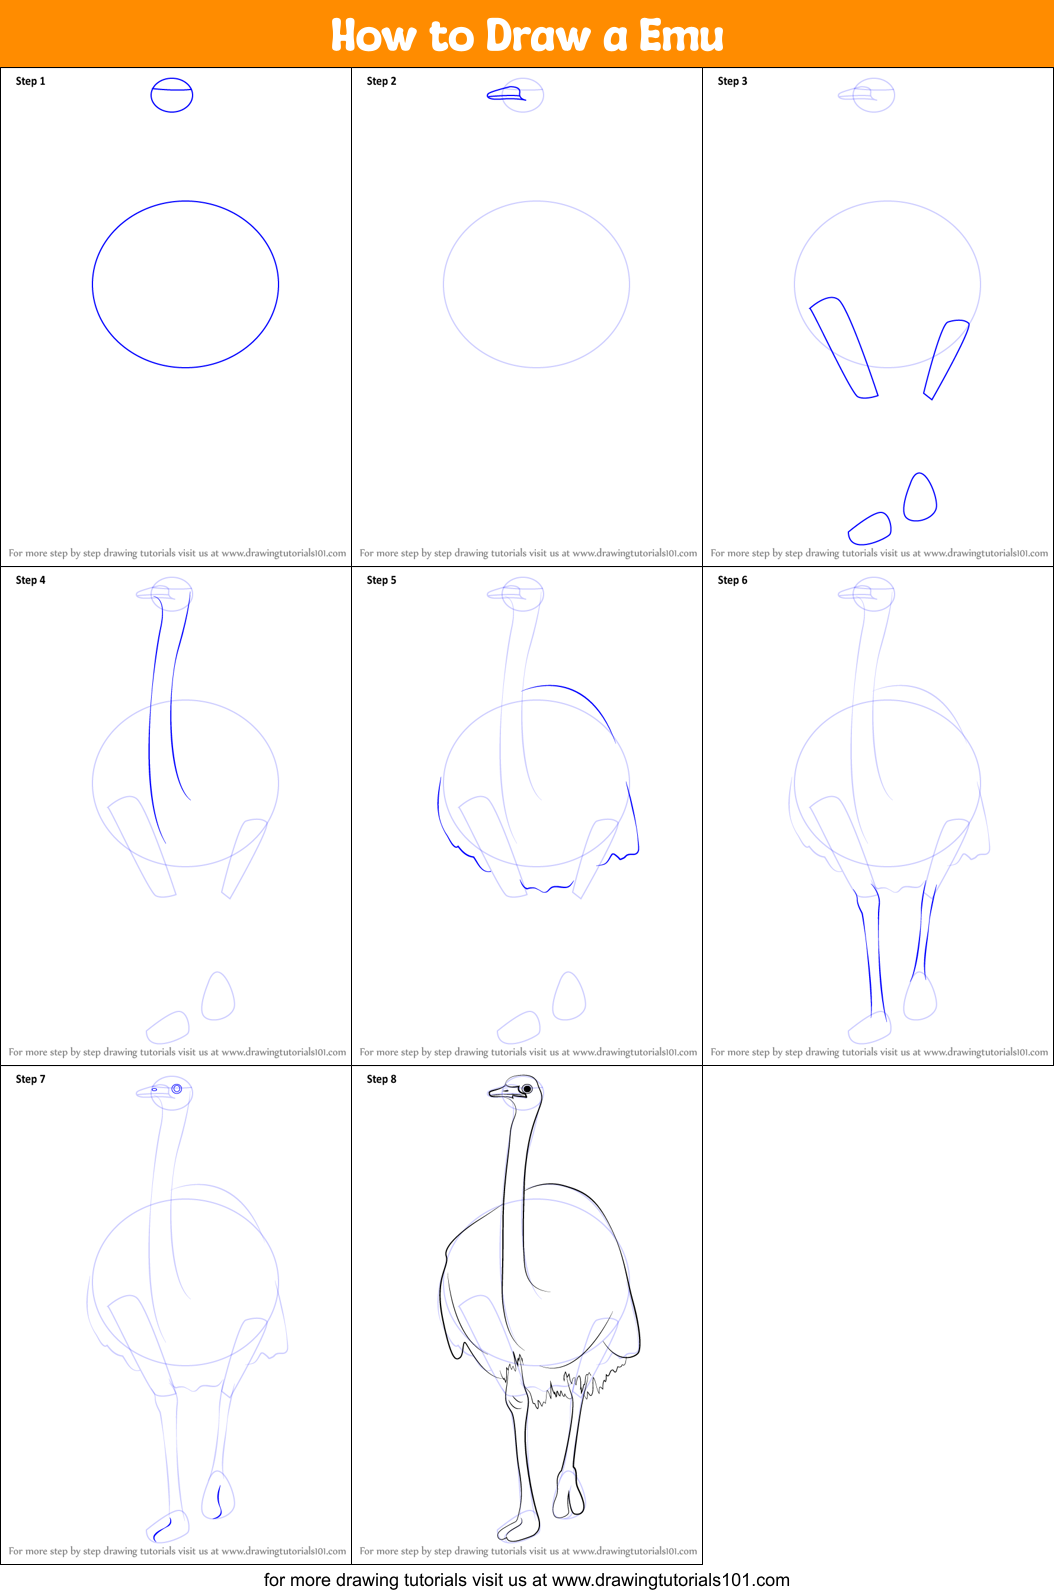 How to Draw a Emu printable step by step drawing sheet